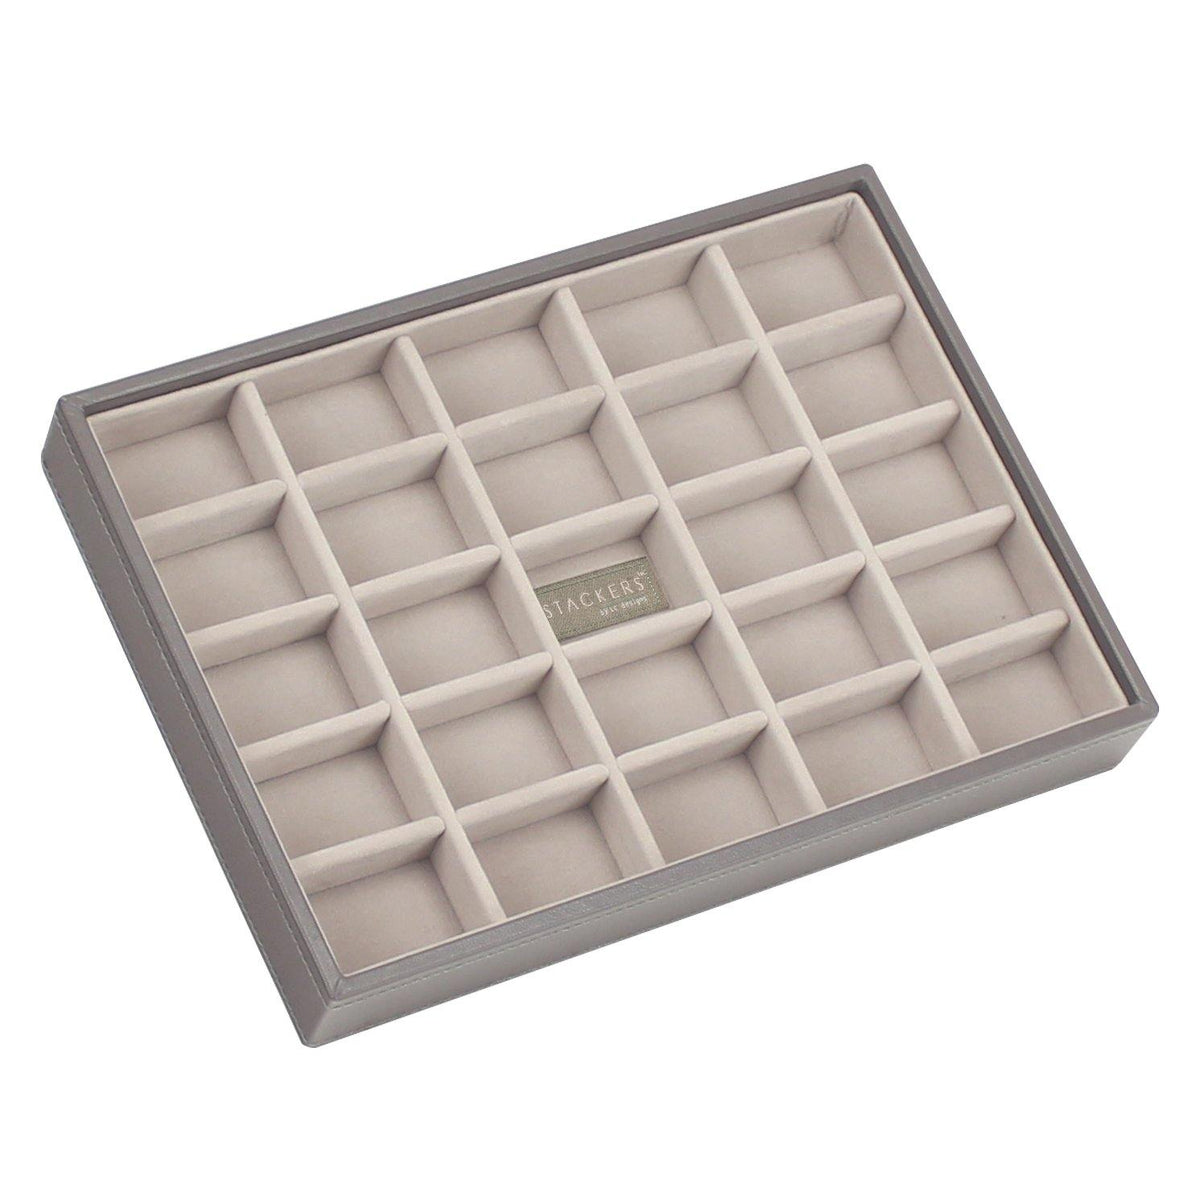 PREMIUM Stackers Mink Jewellery Box 25 Section tray